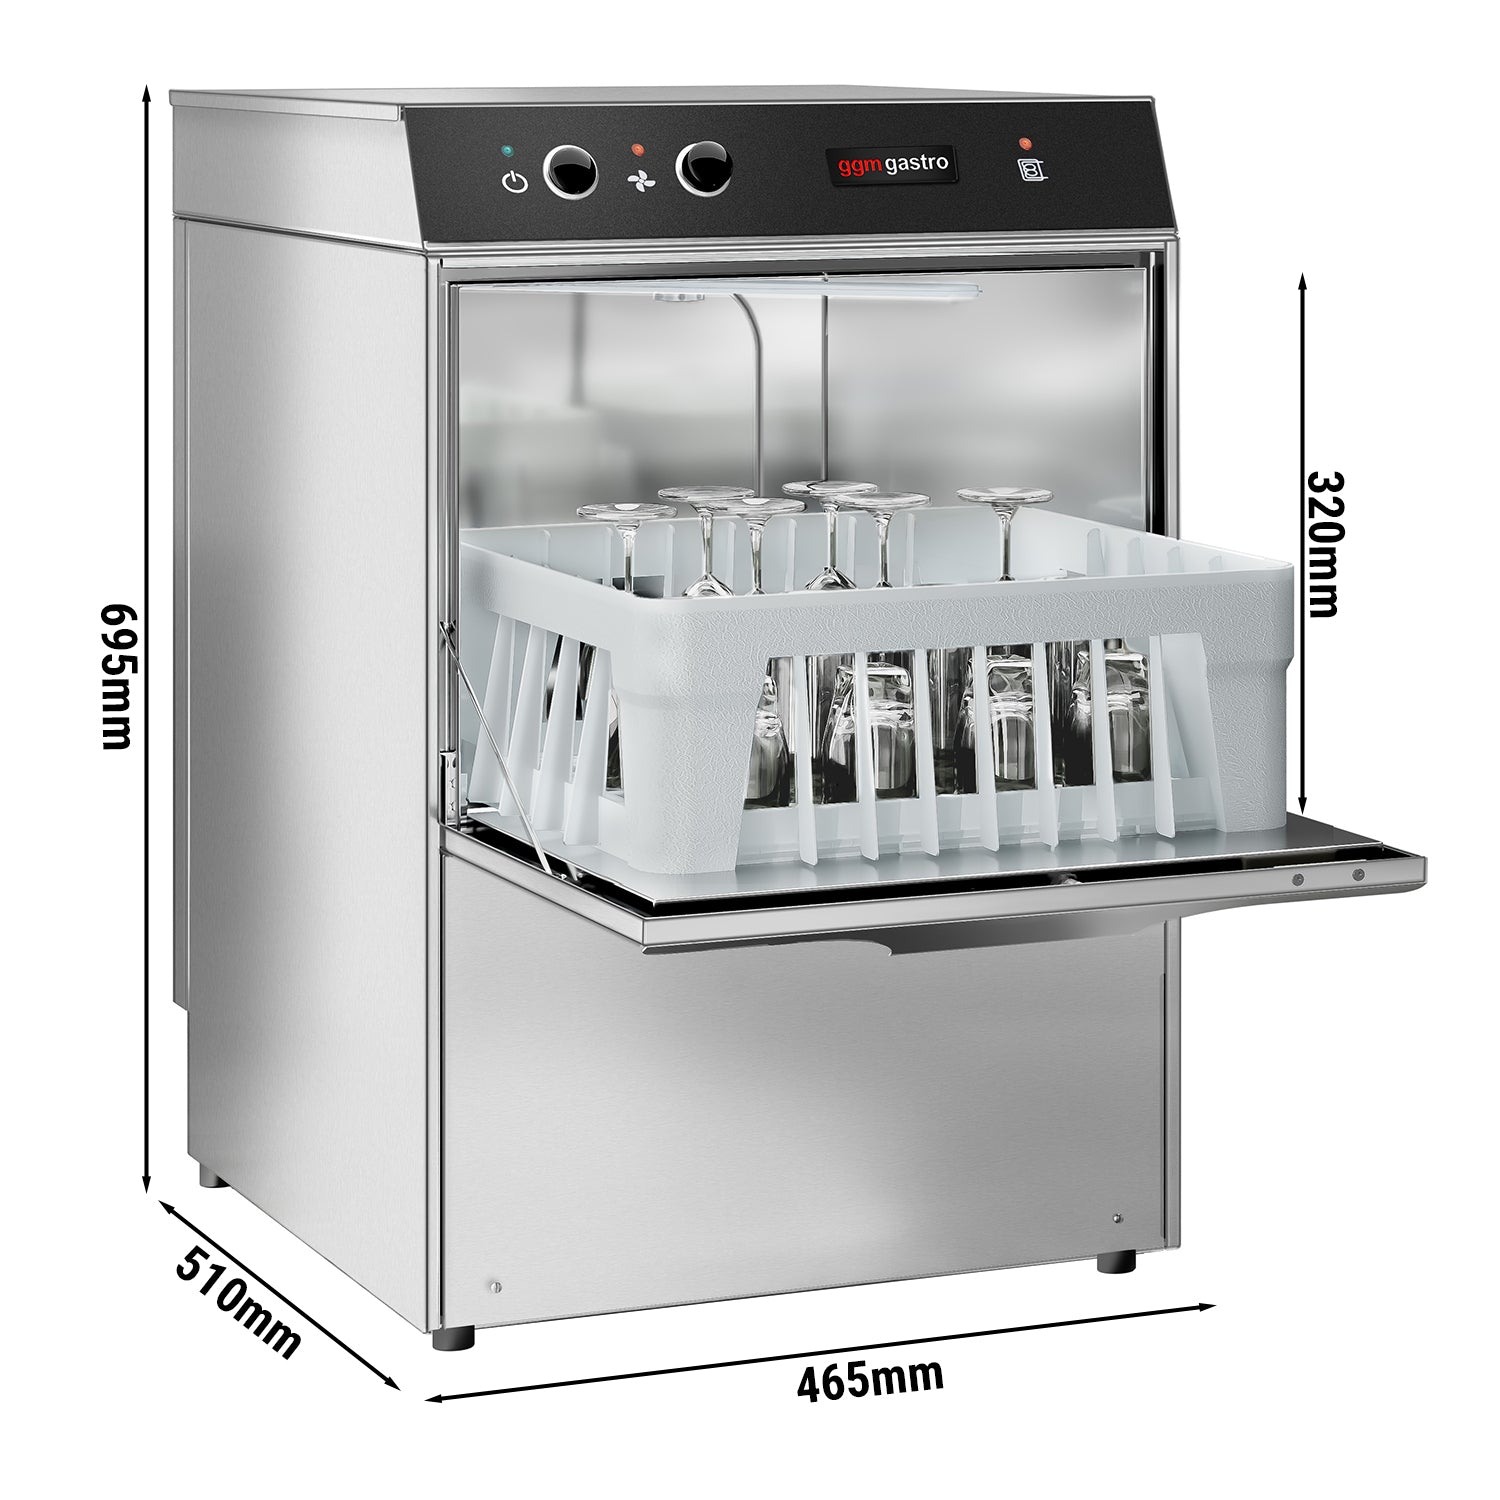 Dishwasher, 2.9 kW, without drain pump, with automatic detergent dispenser